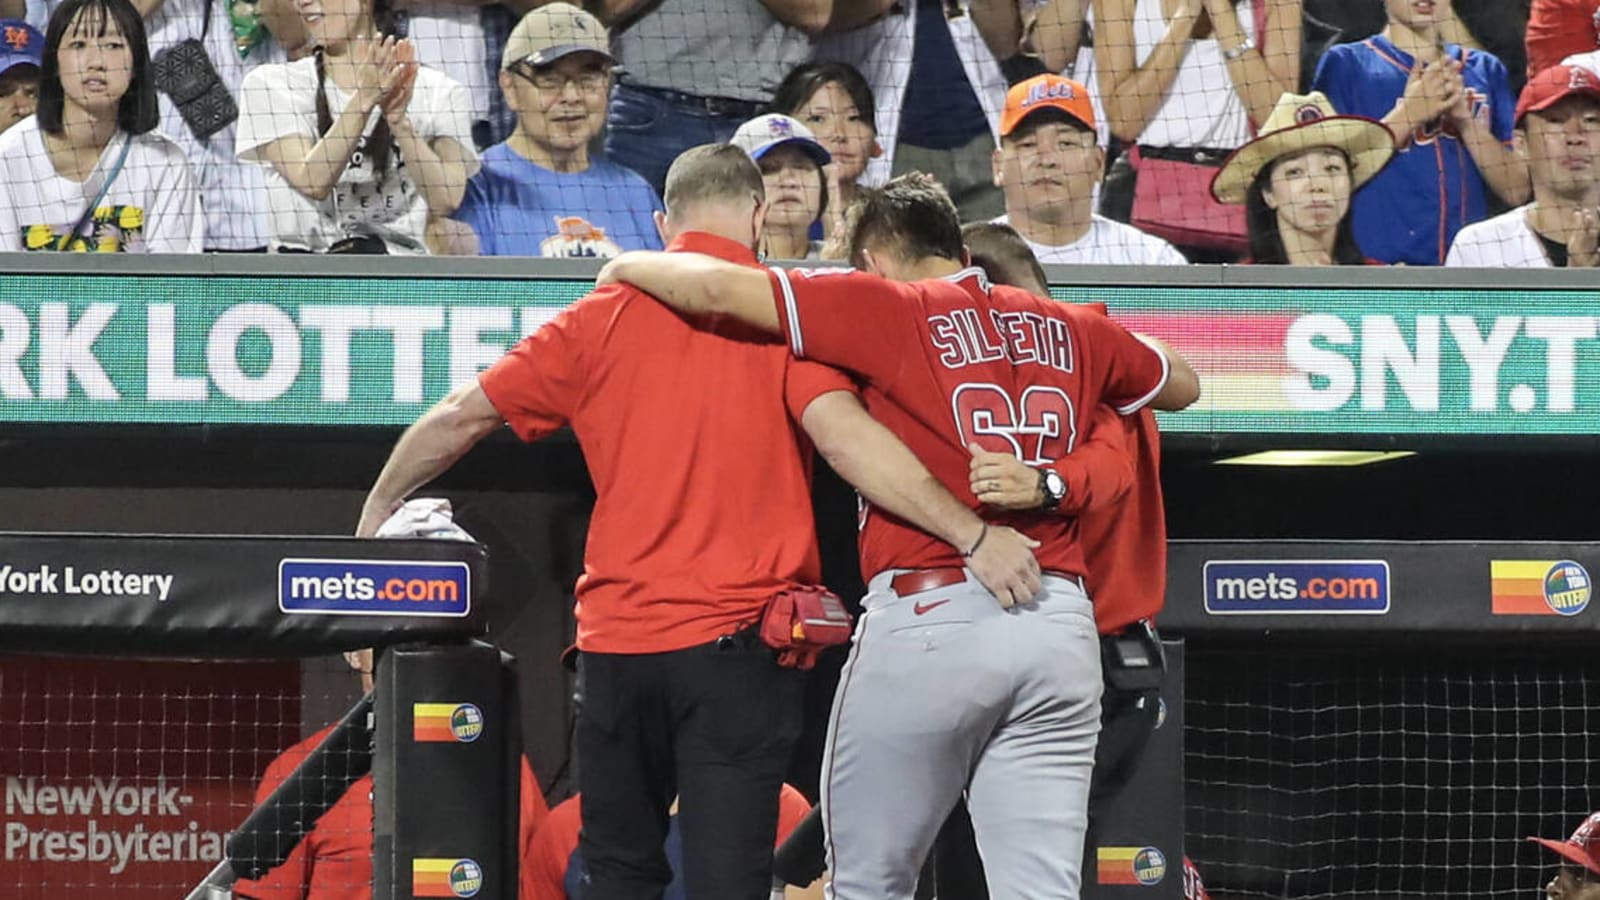 Angels pitcher exits after being hit in the head